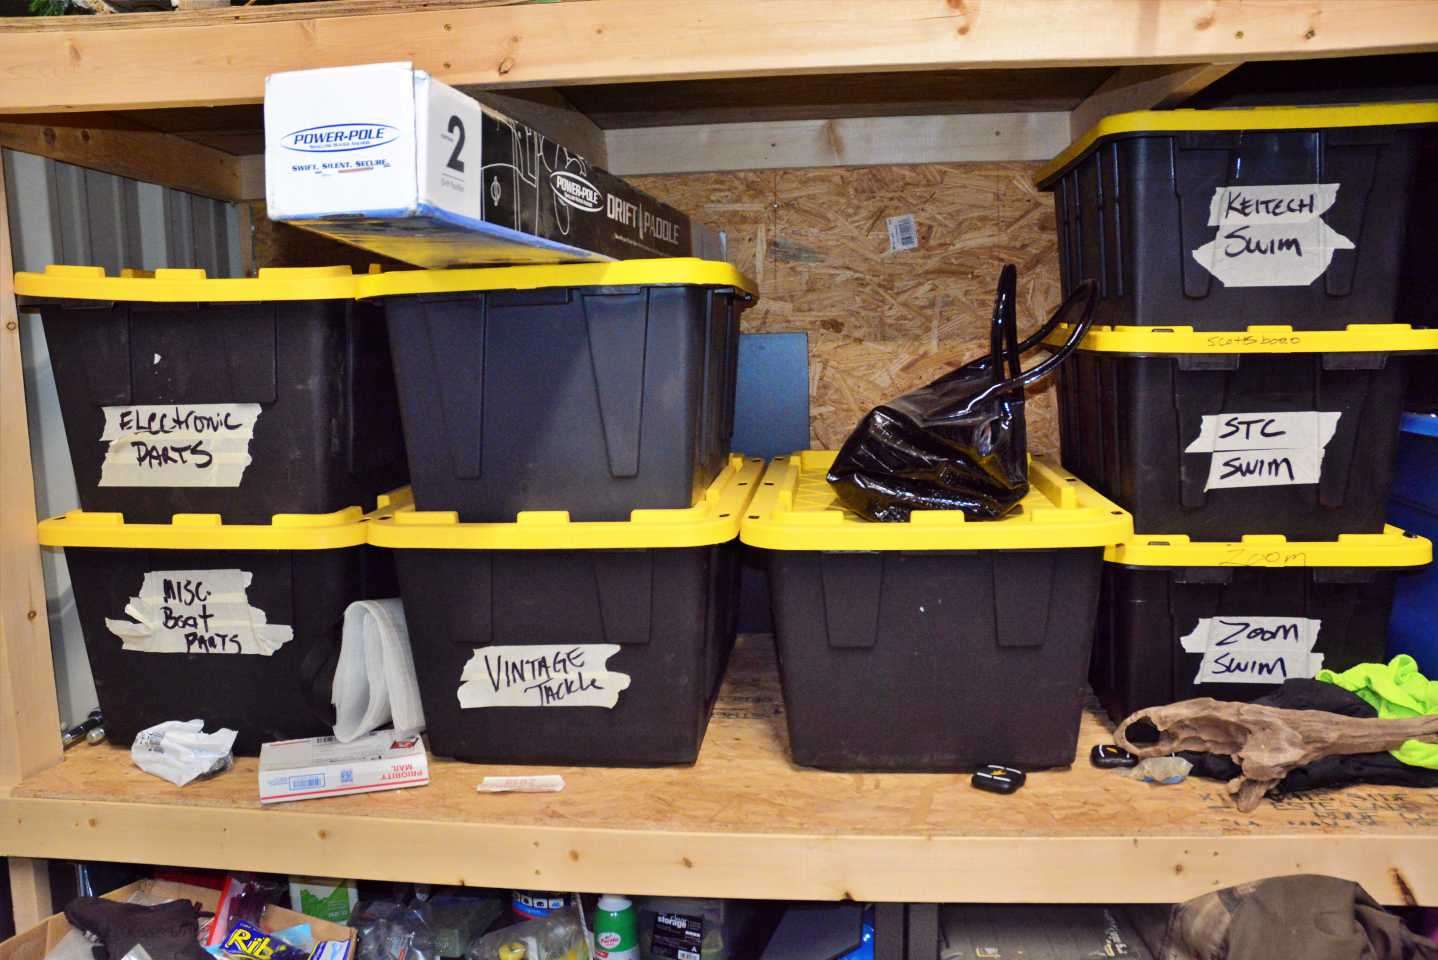 Tucked away in a corner are these special purpose boxes, including a container for Scottsboro Tackle Co. baits. And with that, the tour ends, and Gross returns to preparing for the season. 